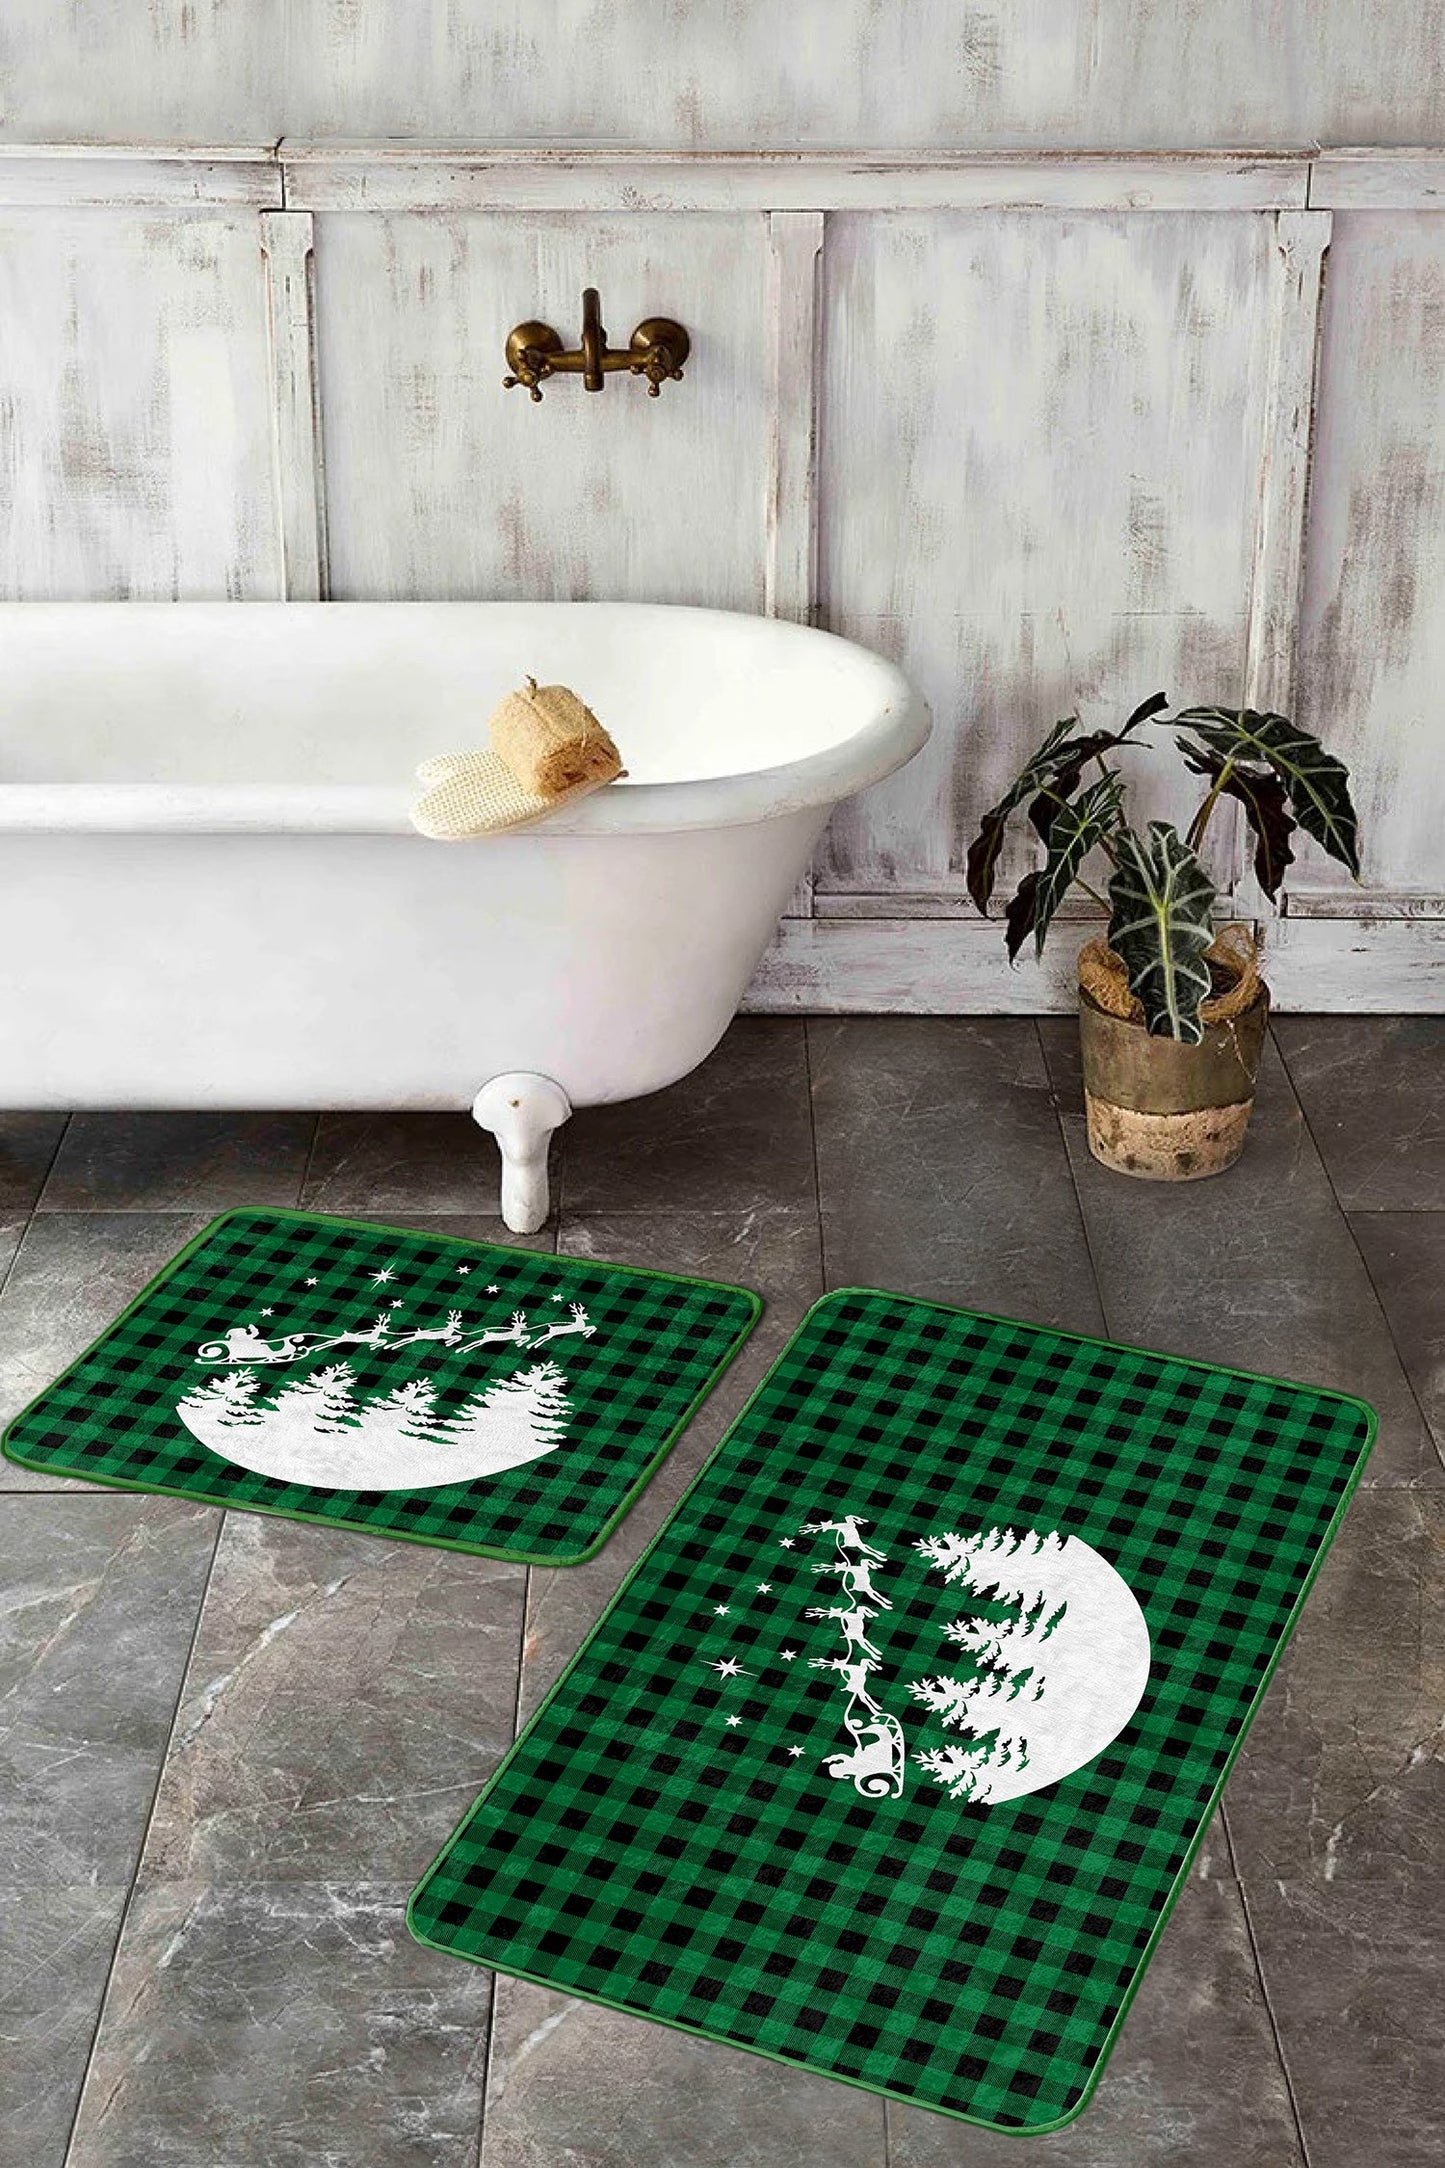 Elegant Set with Delicate Green Patterns for Christmas Bathroom Decor